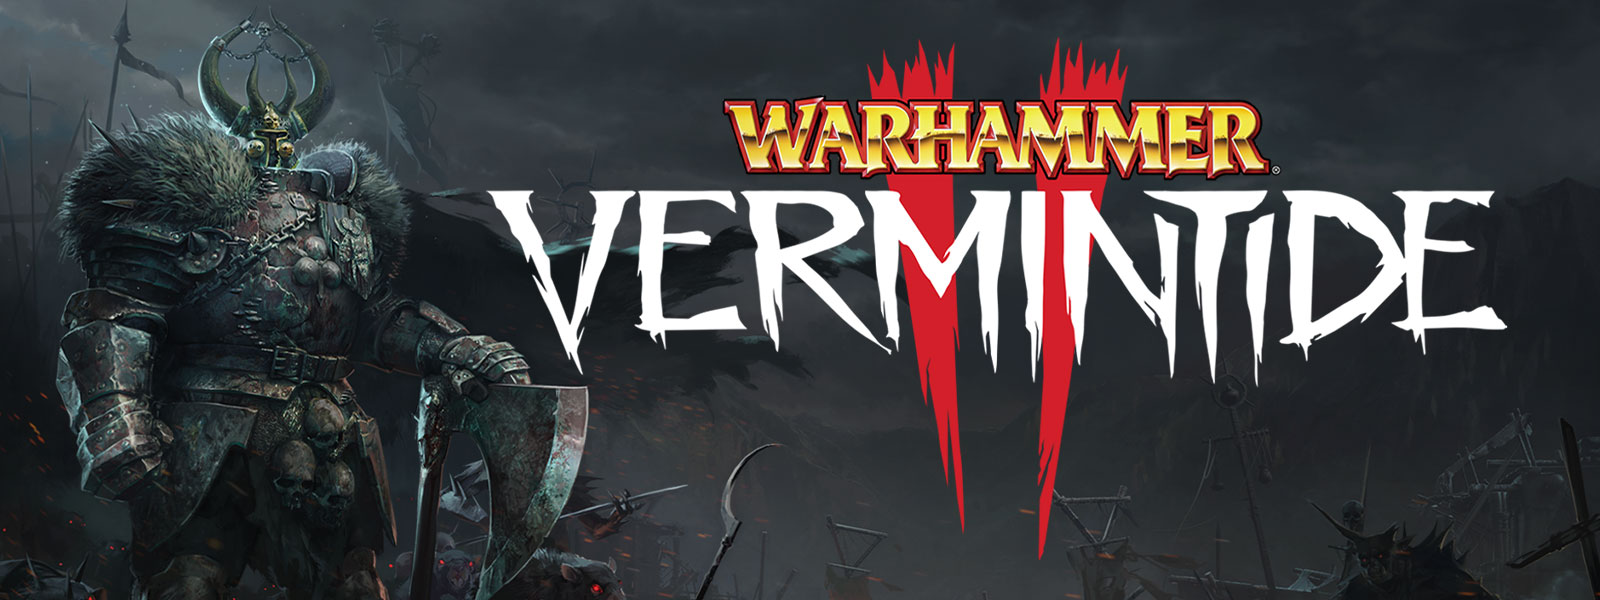 Warhammer: Vermintide 2, An armored figure with fur pauldrons stands at the vanguard of an army of rats with glowing eyes.